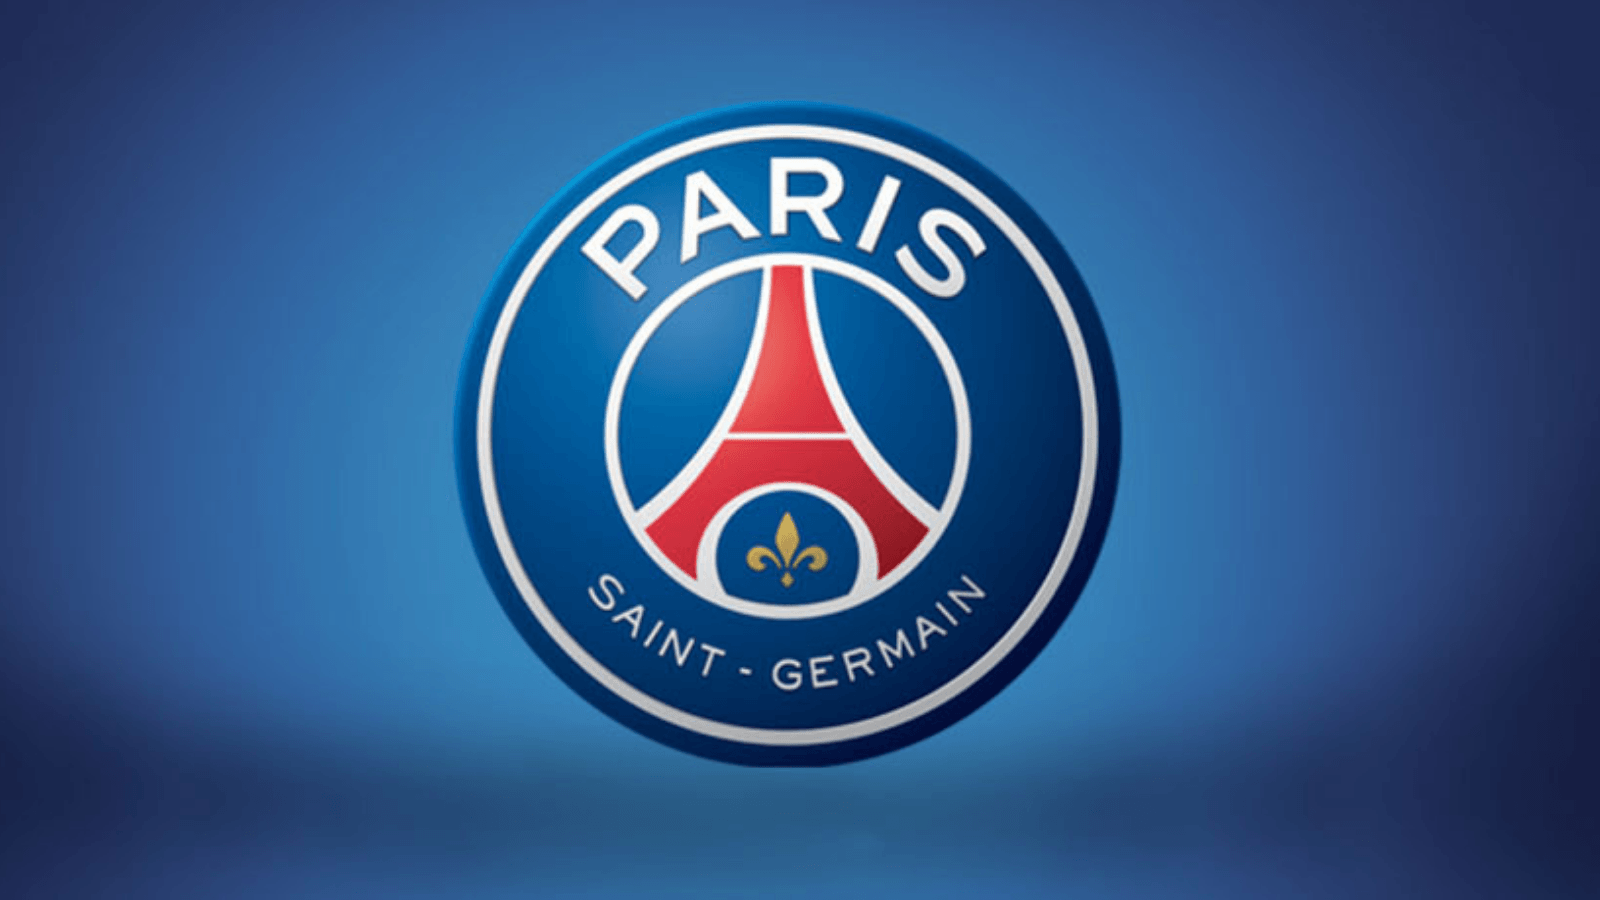 Paris Saint Germain Becomes First Football Club Ever To Launch Own